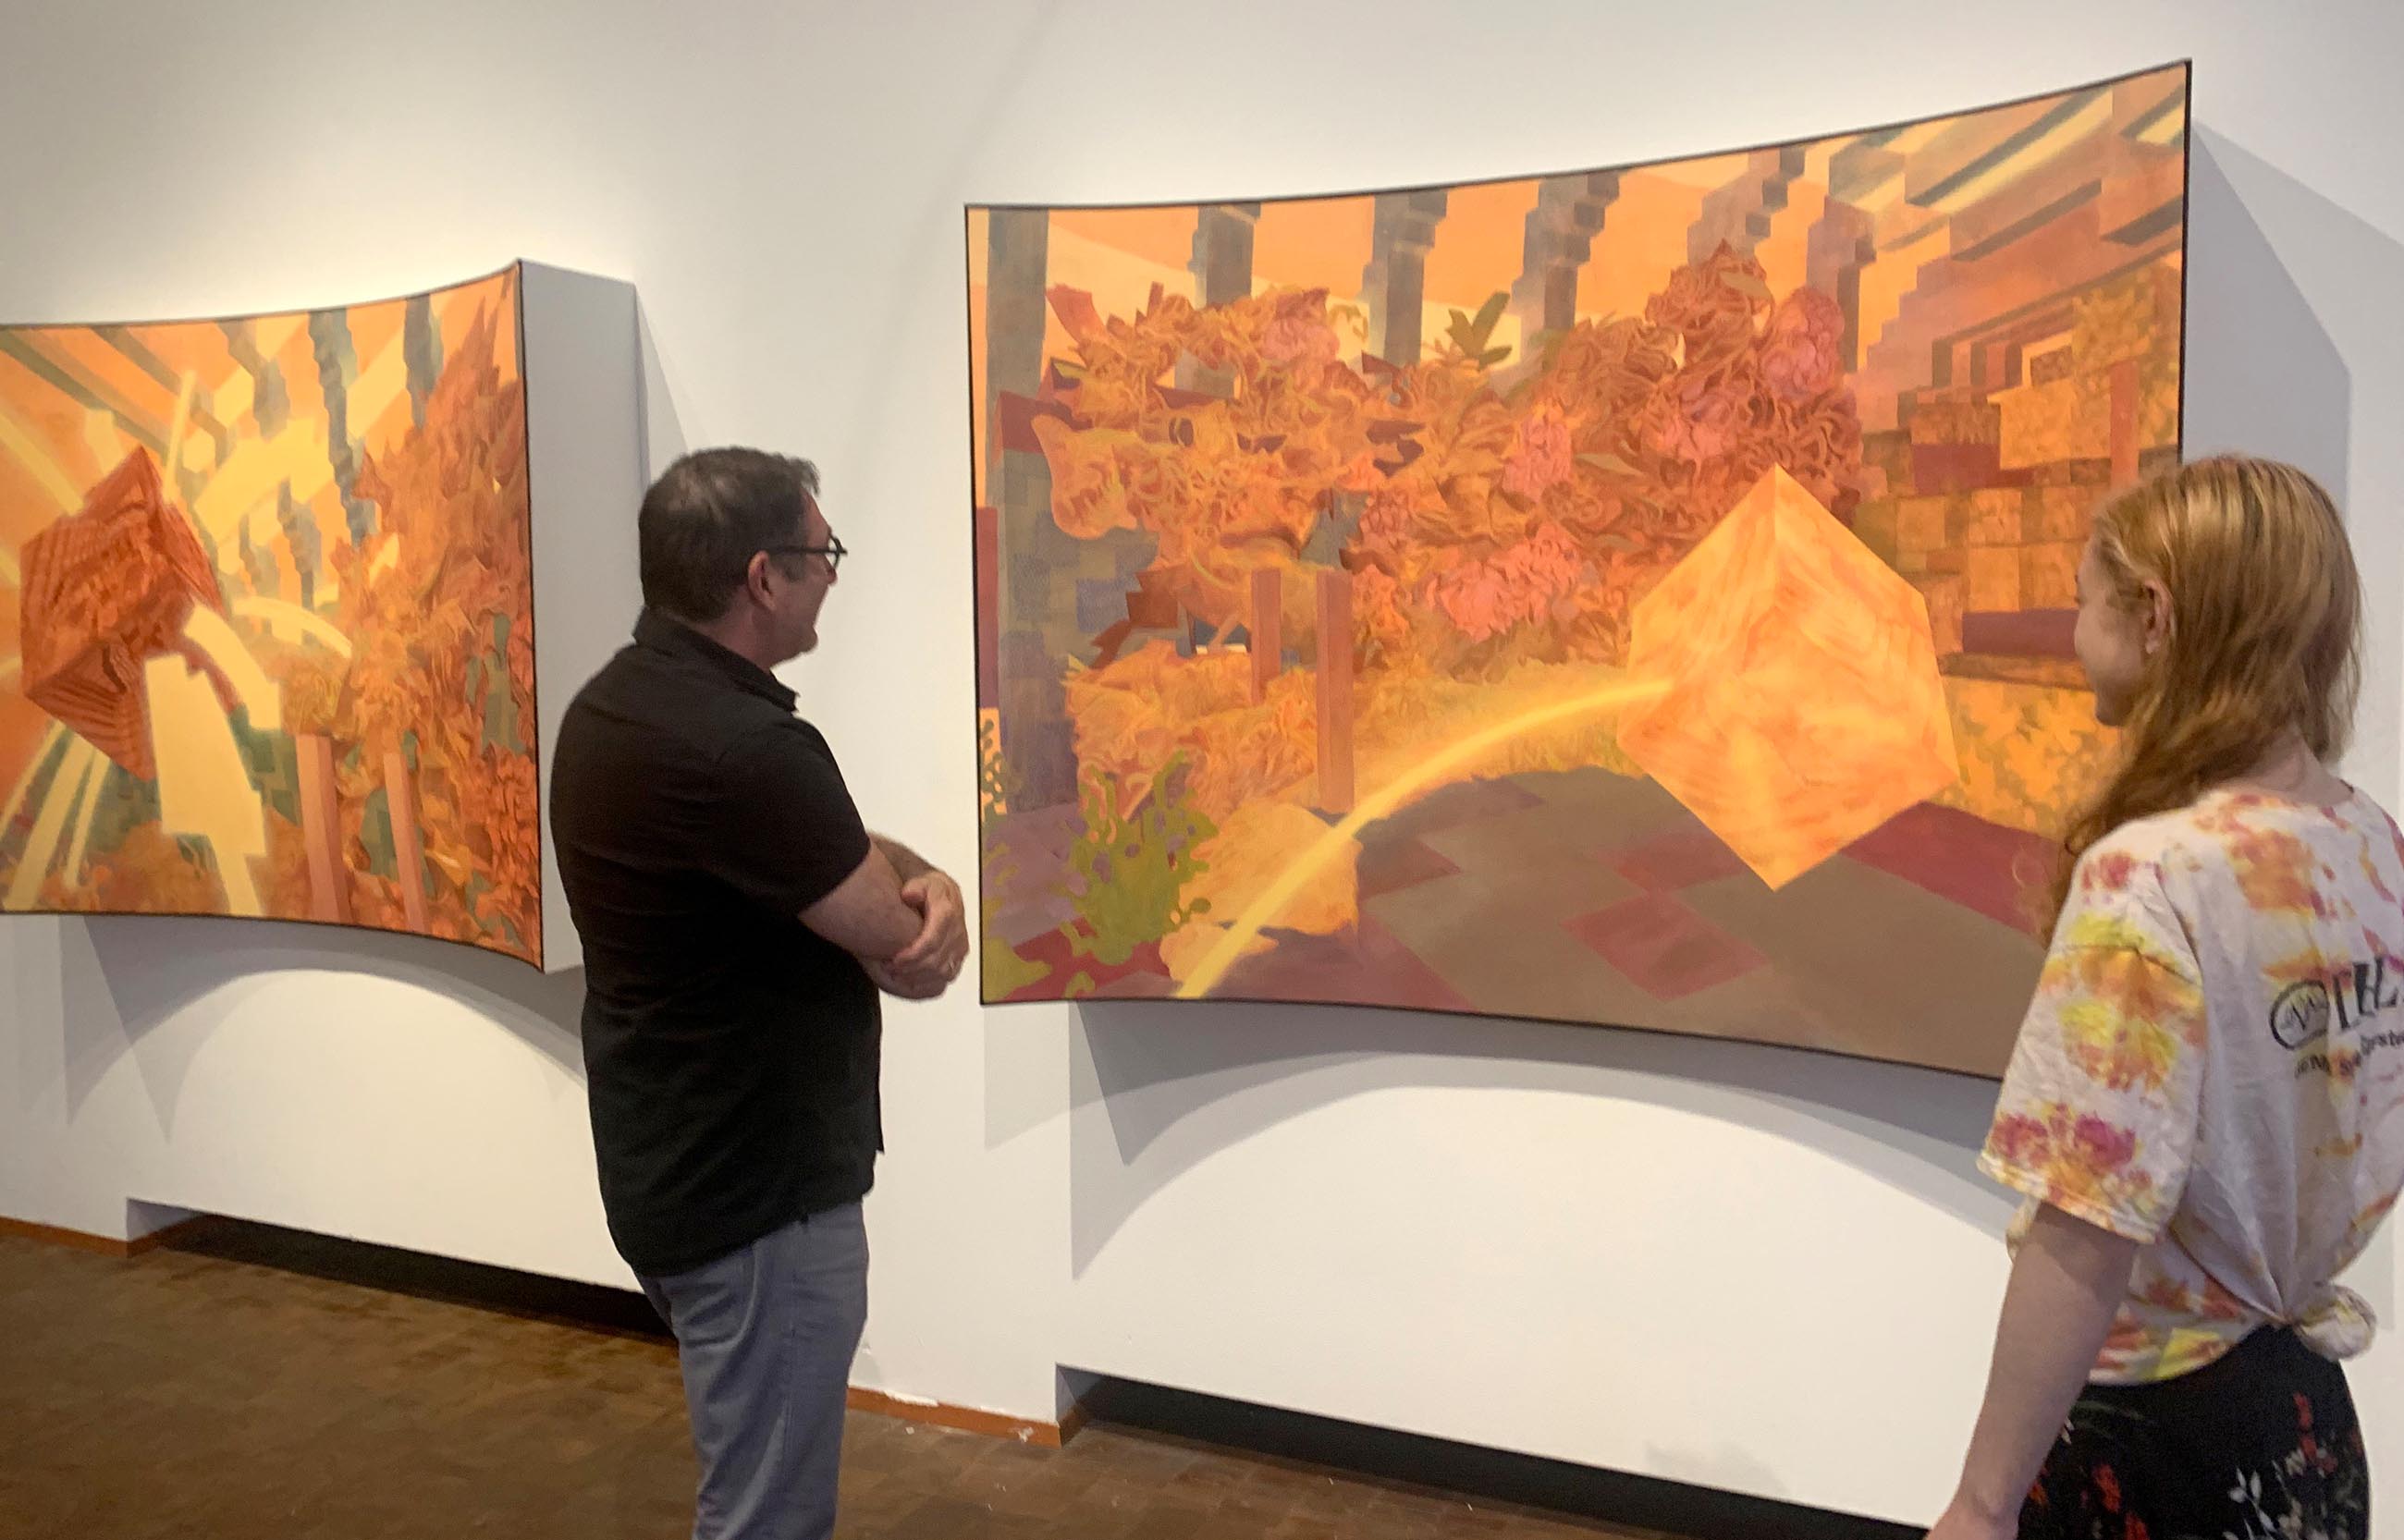 people looking at a large orange artwork in a gallery